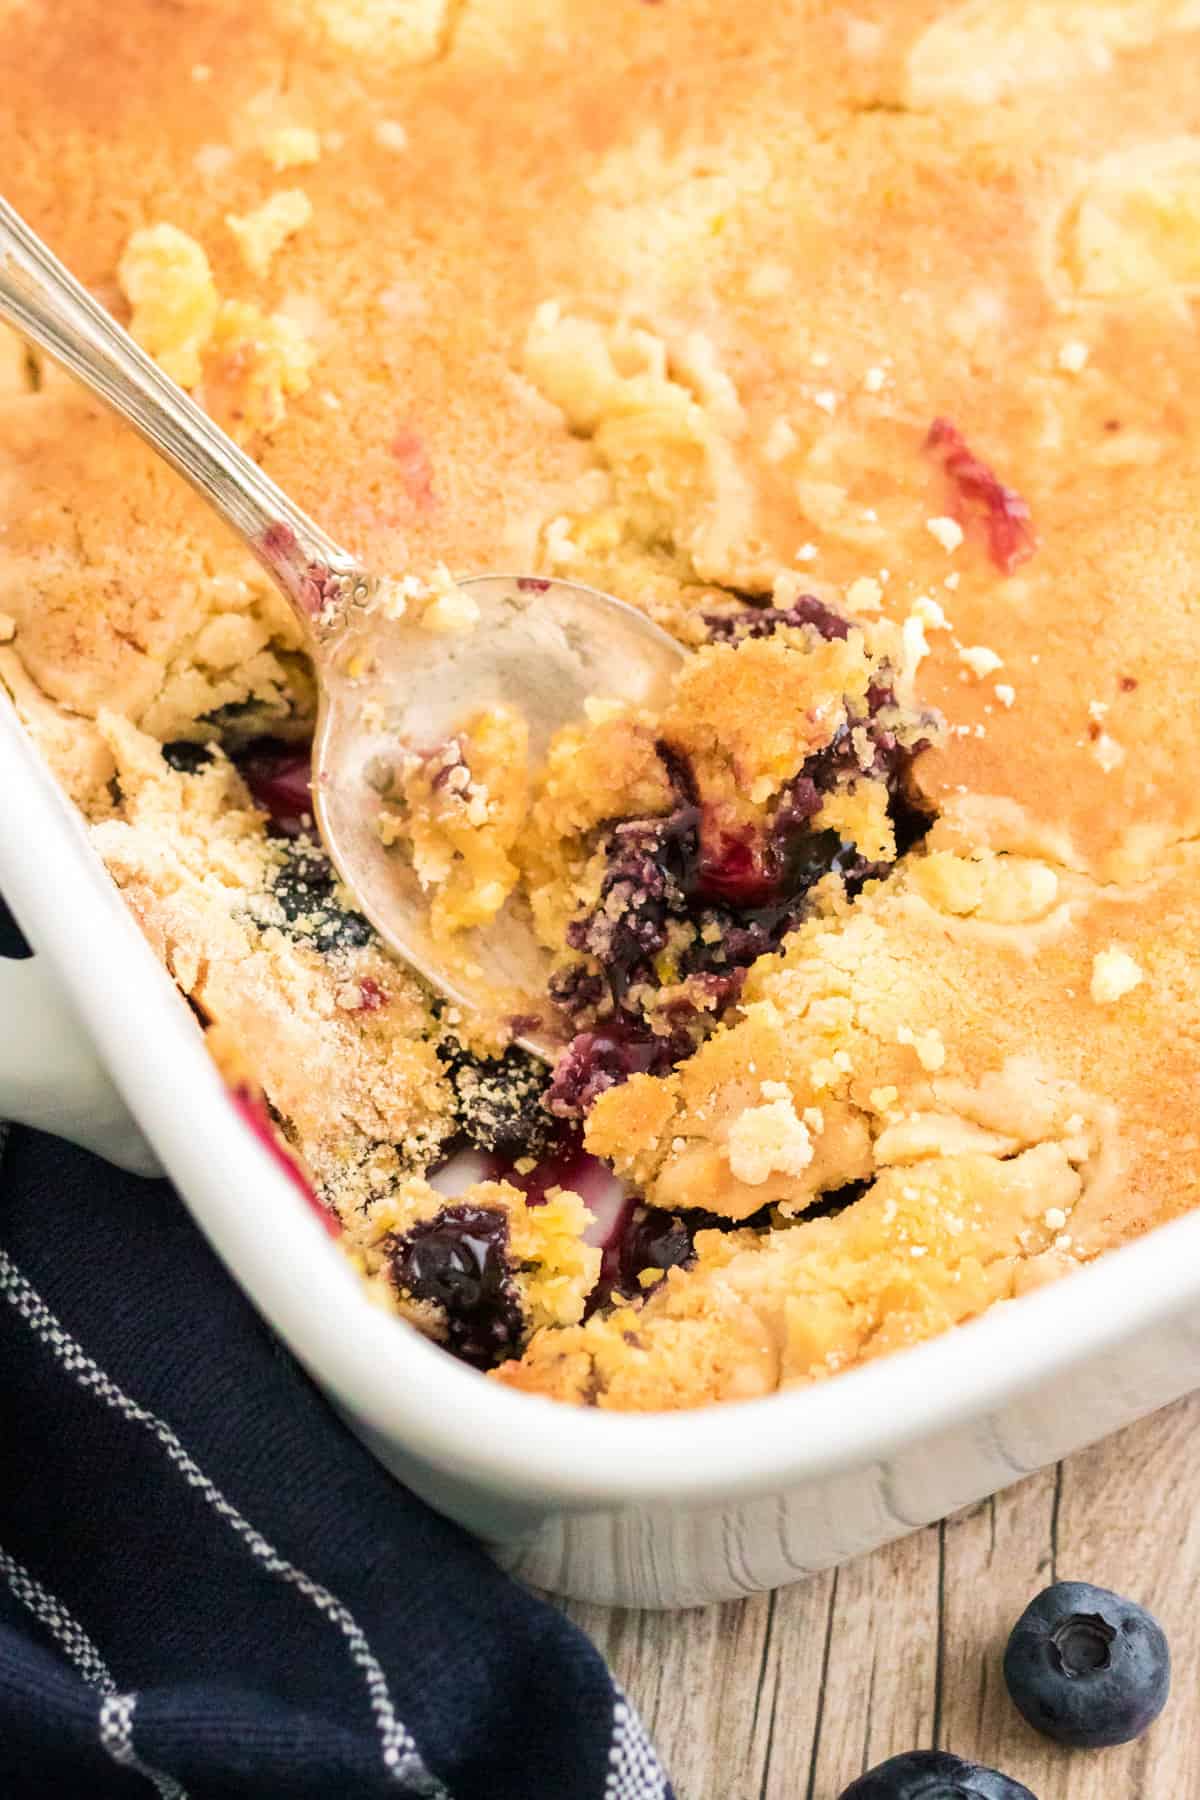 Lemon Blueberry Dump Cake in white 9 x 13 pan with serving spoon breaking through the golden cake top layer so the blueberry pie filling peeks out.